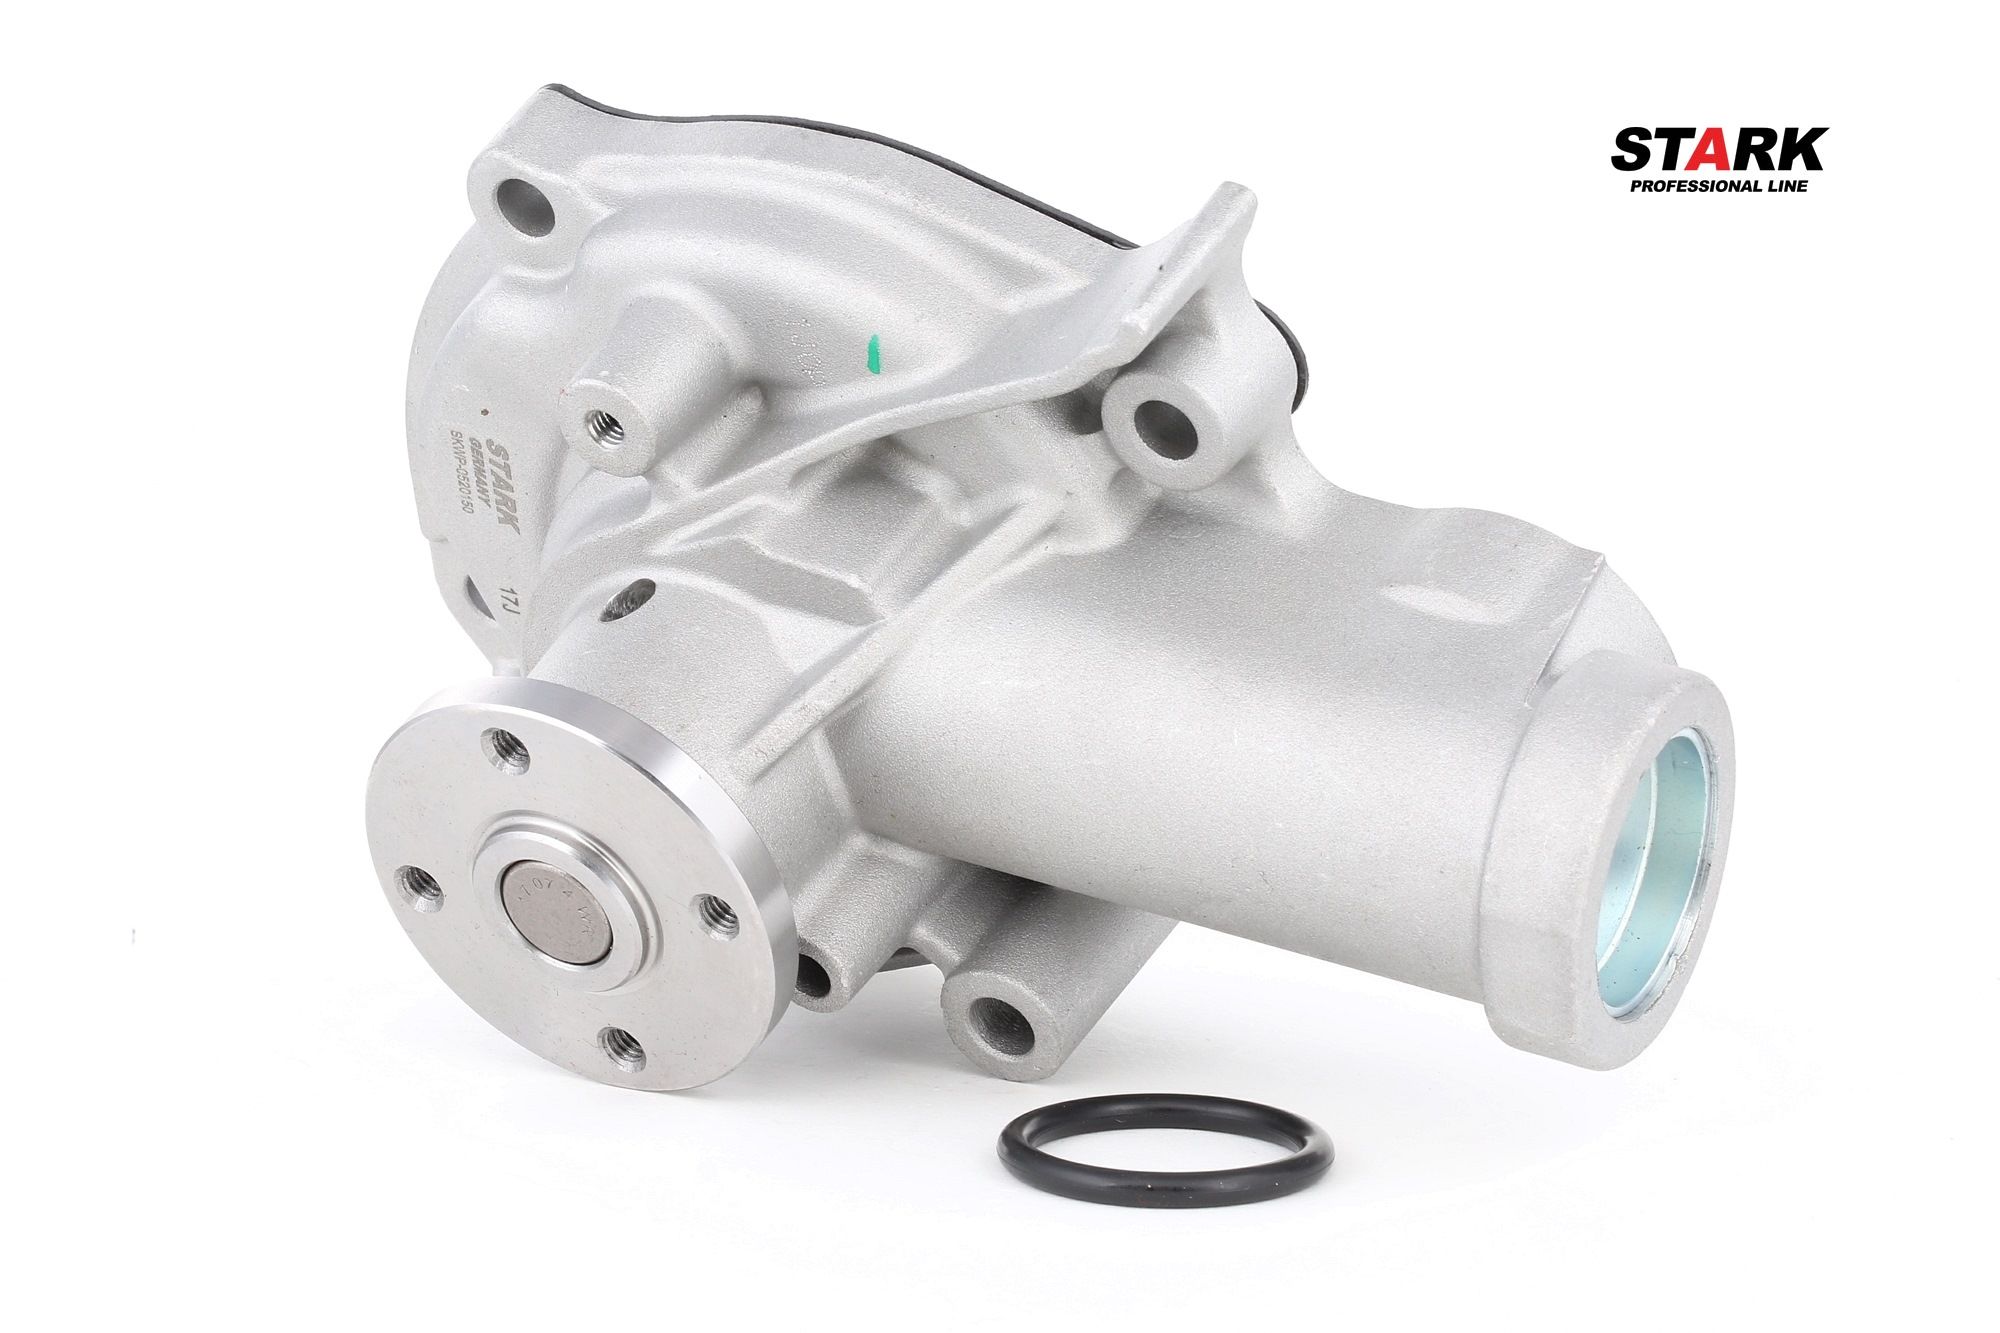 STARK SKWP-0520150 Water pump Cast Aluminium, without belt pulley, with gaskets/seals, Mechanical, Metal impeller